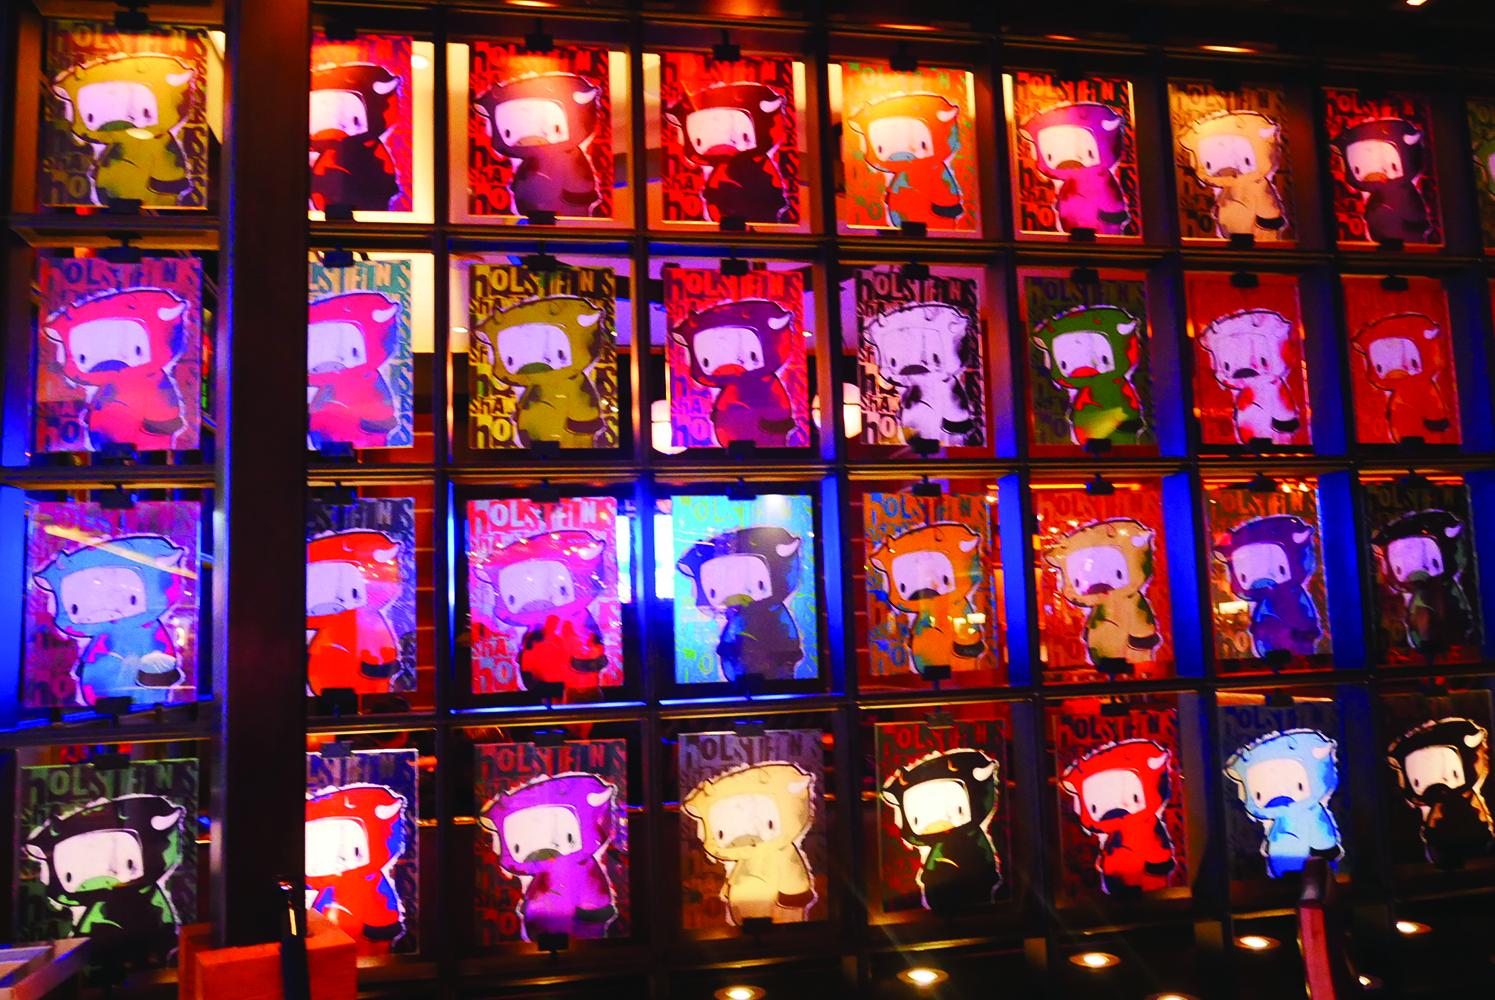 Sinder photographed artwork at Holsteins at the Cosmopolitan Hotel in Las Vegas. Sinder said Sam Dameshek and Tyler Kohlhoff’s photography styles have influenced the direction of her own photography.